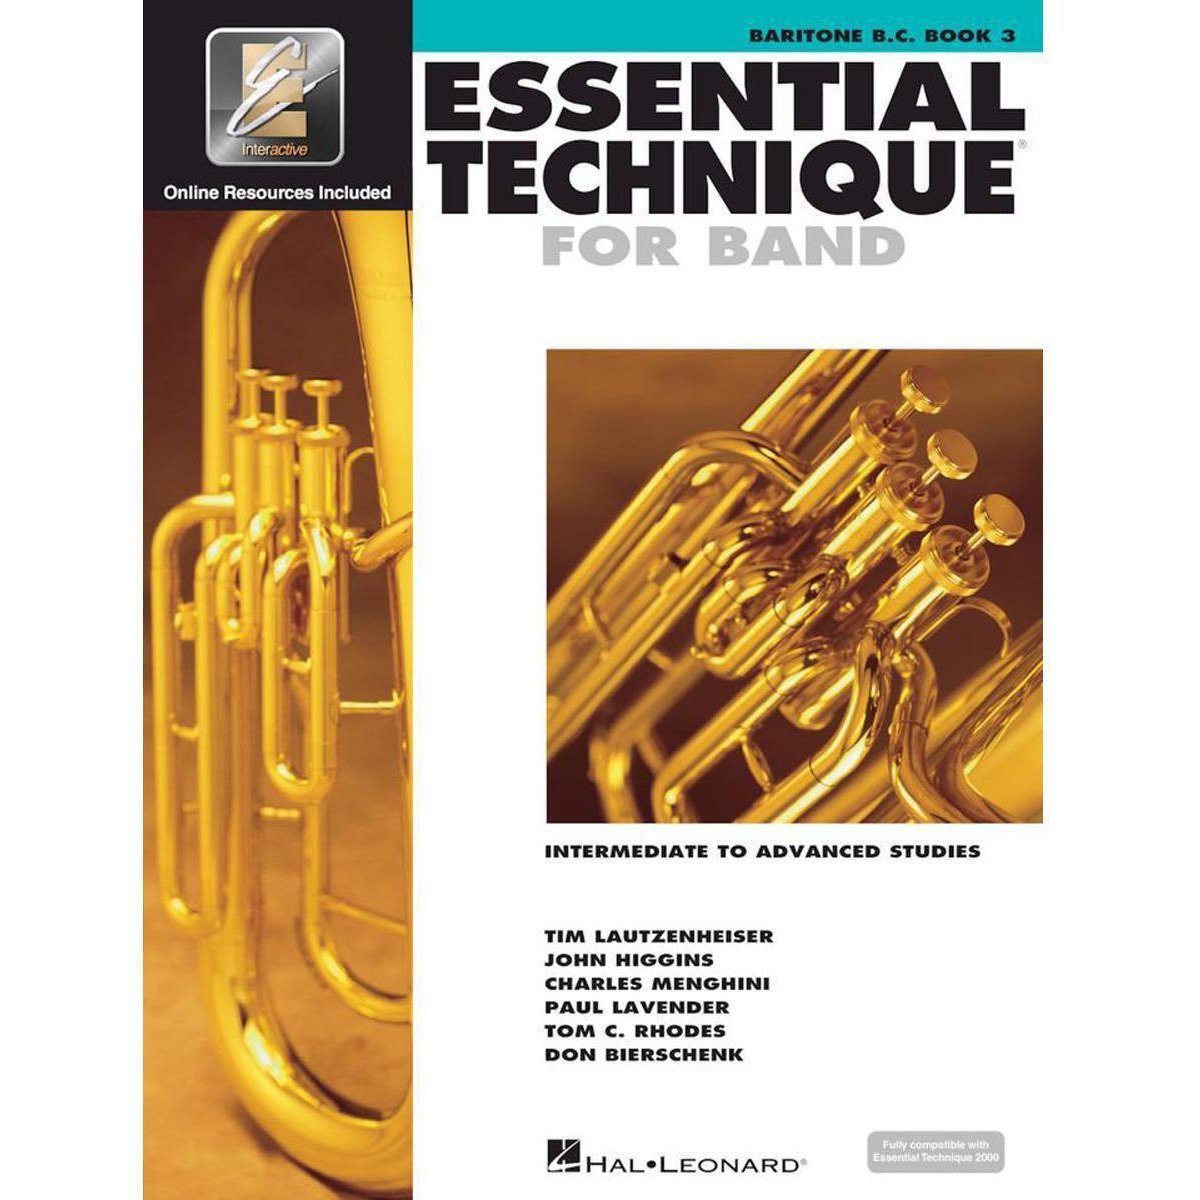 Essential Technique for Band Book 3-Baritone B.C.-Andy's Music